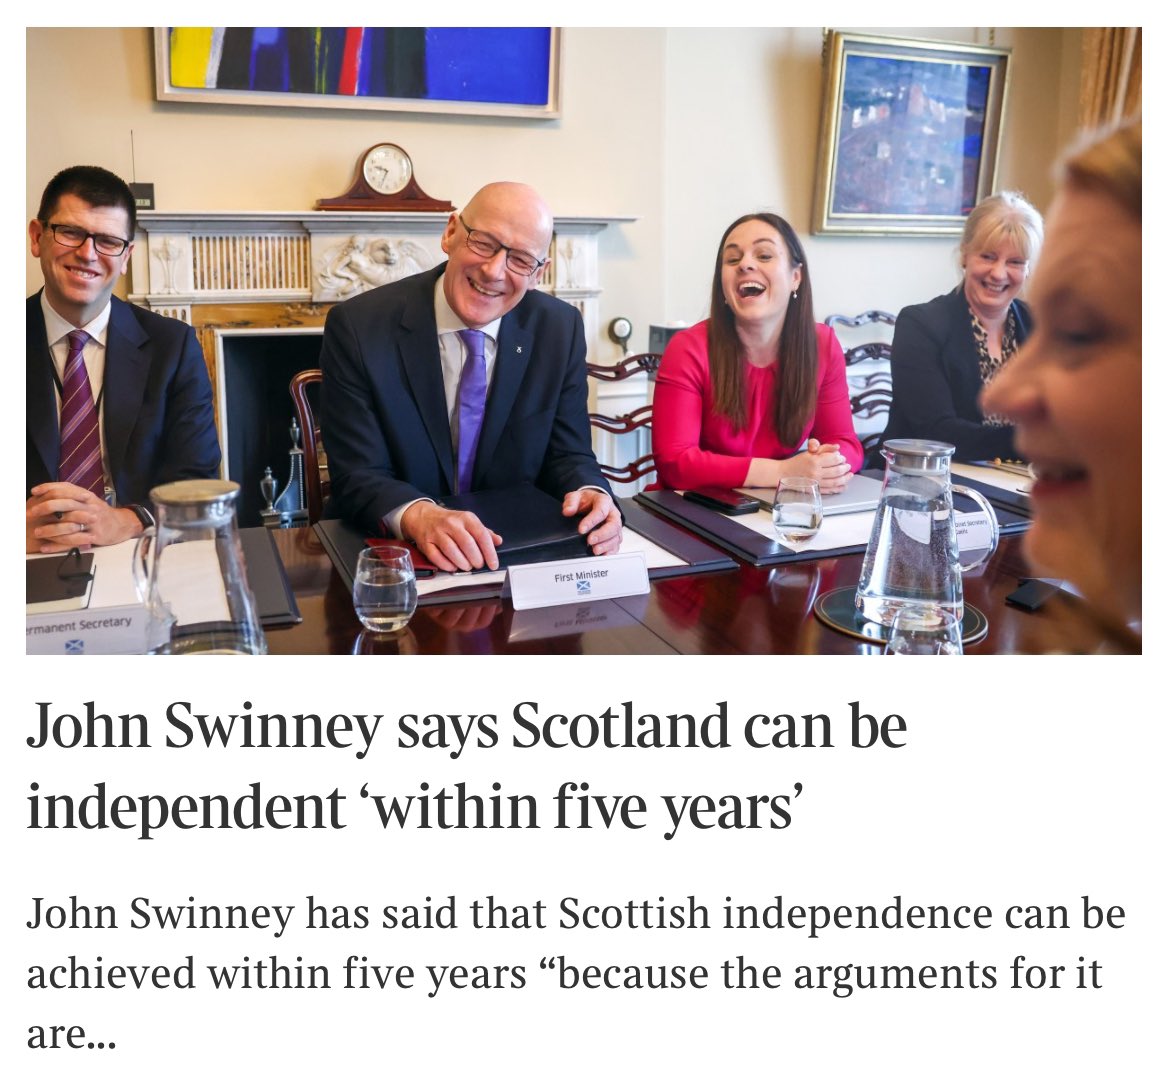 Well played, @timesscotland picture editor.